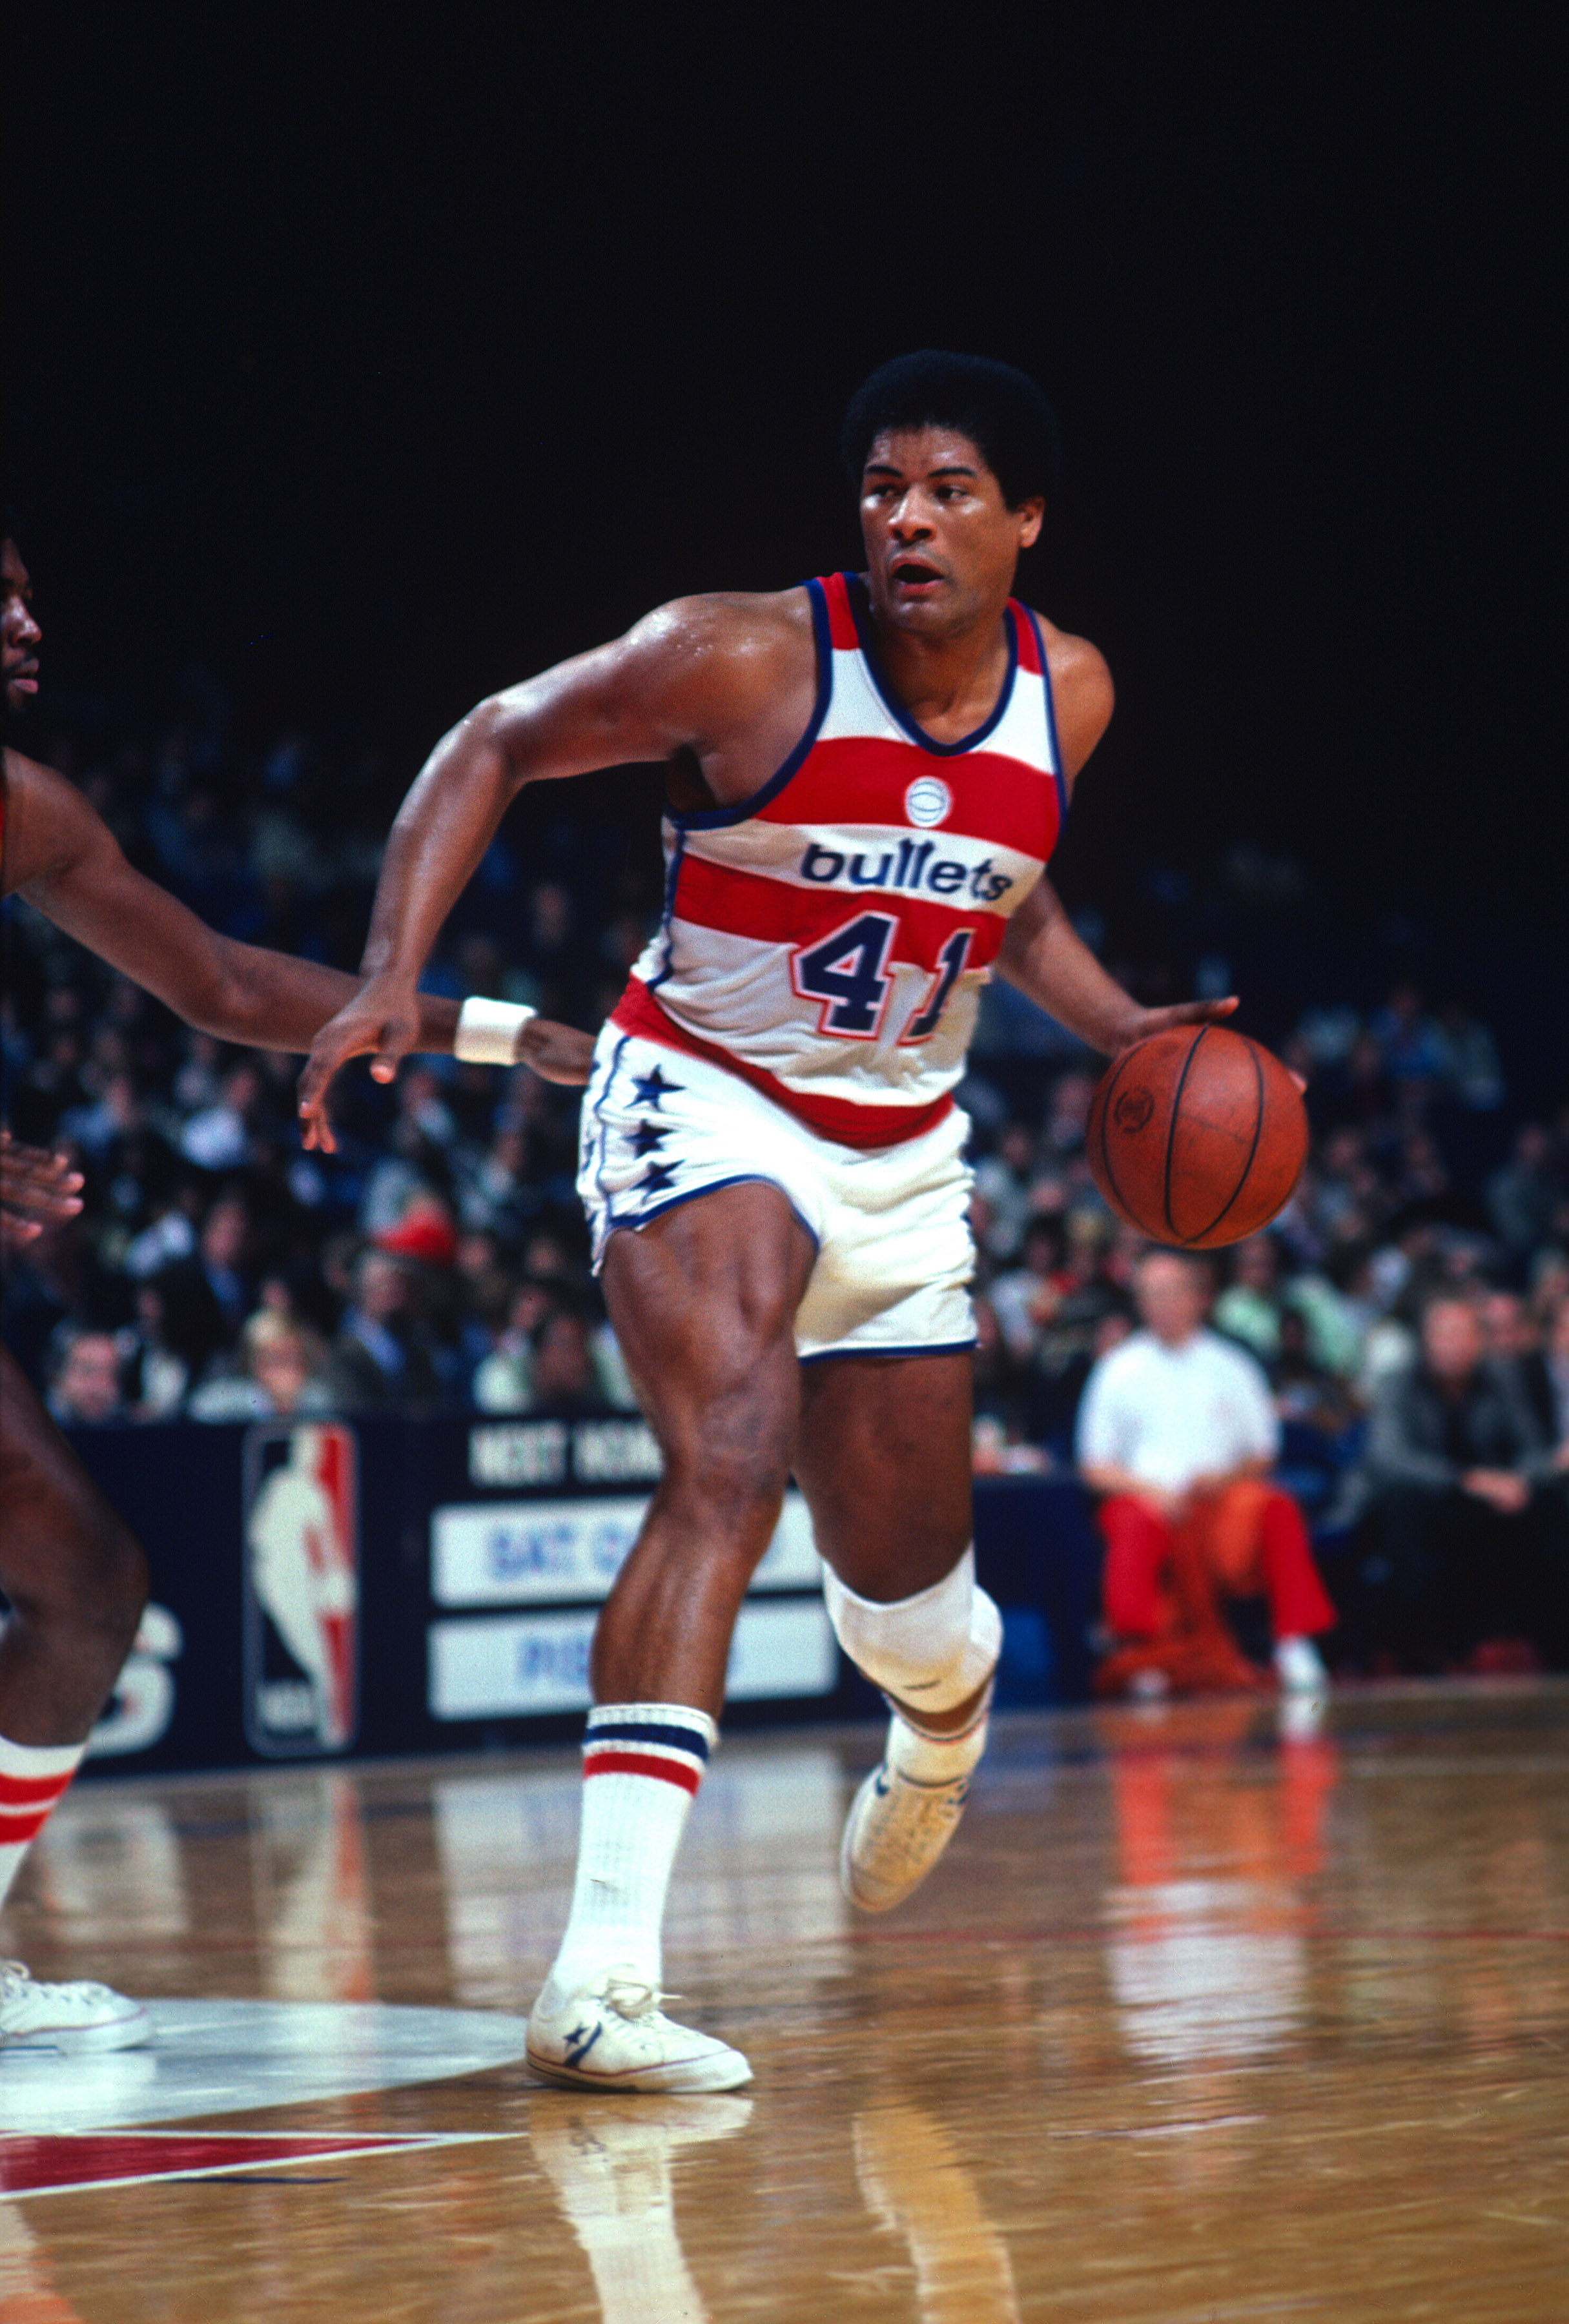 This is a photo of Wes Unself in his 1980 season with the Washington Bullets.